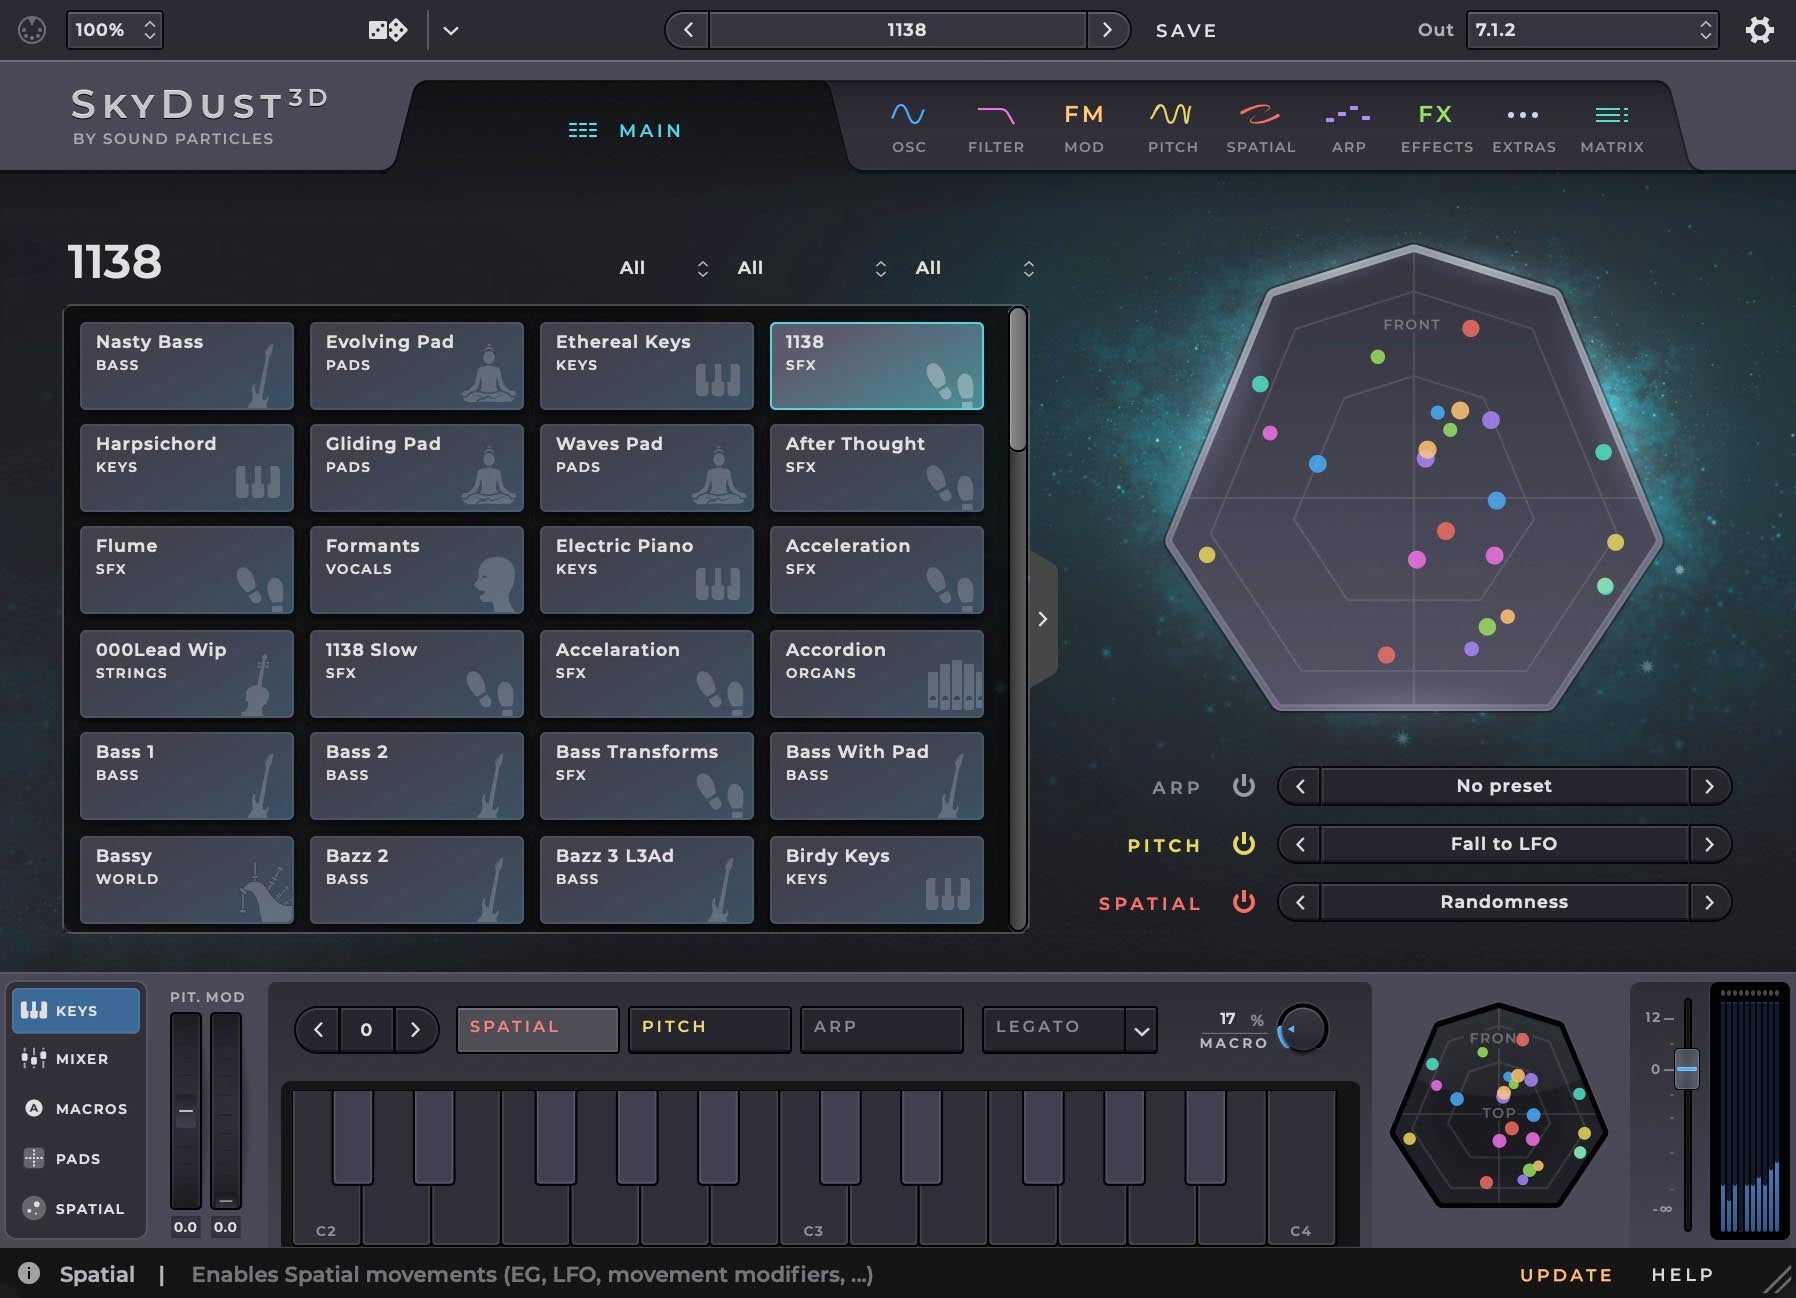 New Sound Particles - SkyDust Stereo & Binaural Synth EDU - Plugin AAX/AU/VST - Mac/Pc  - (Download/Activation)